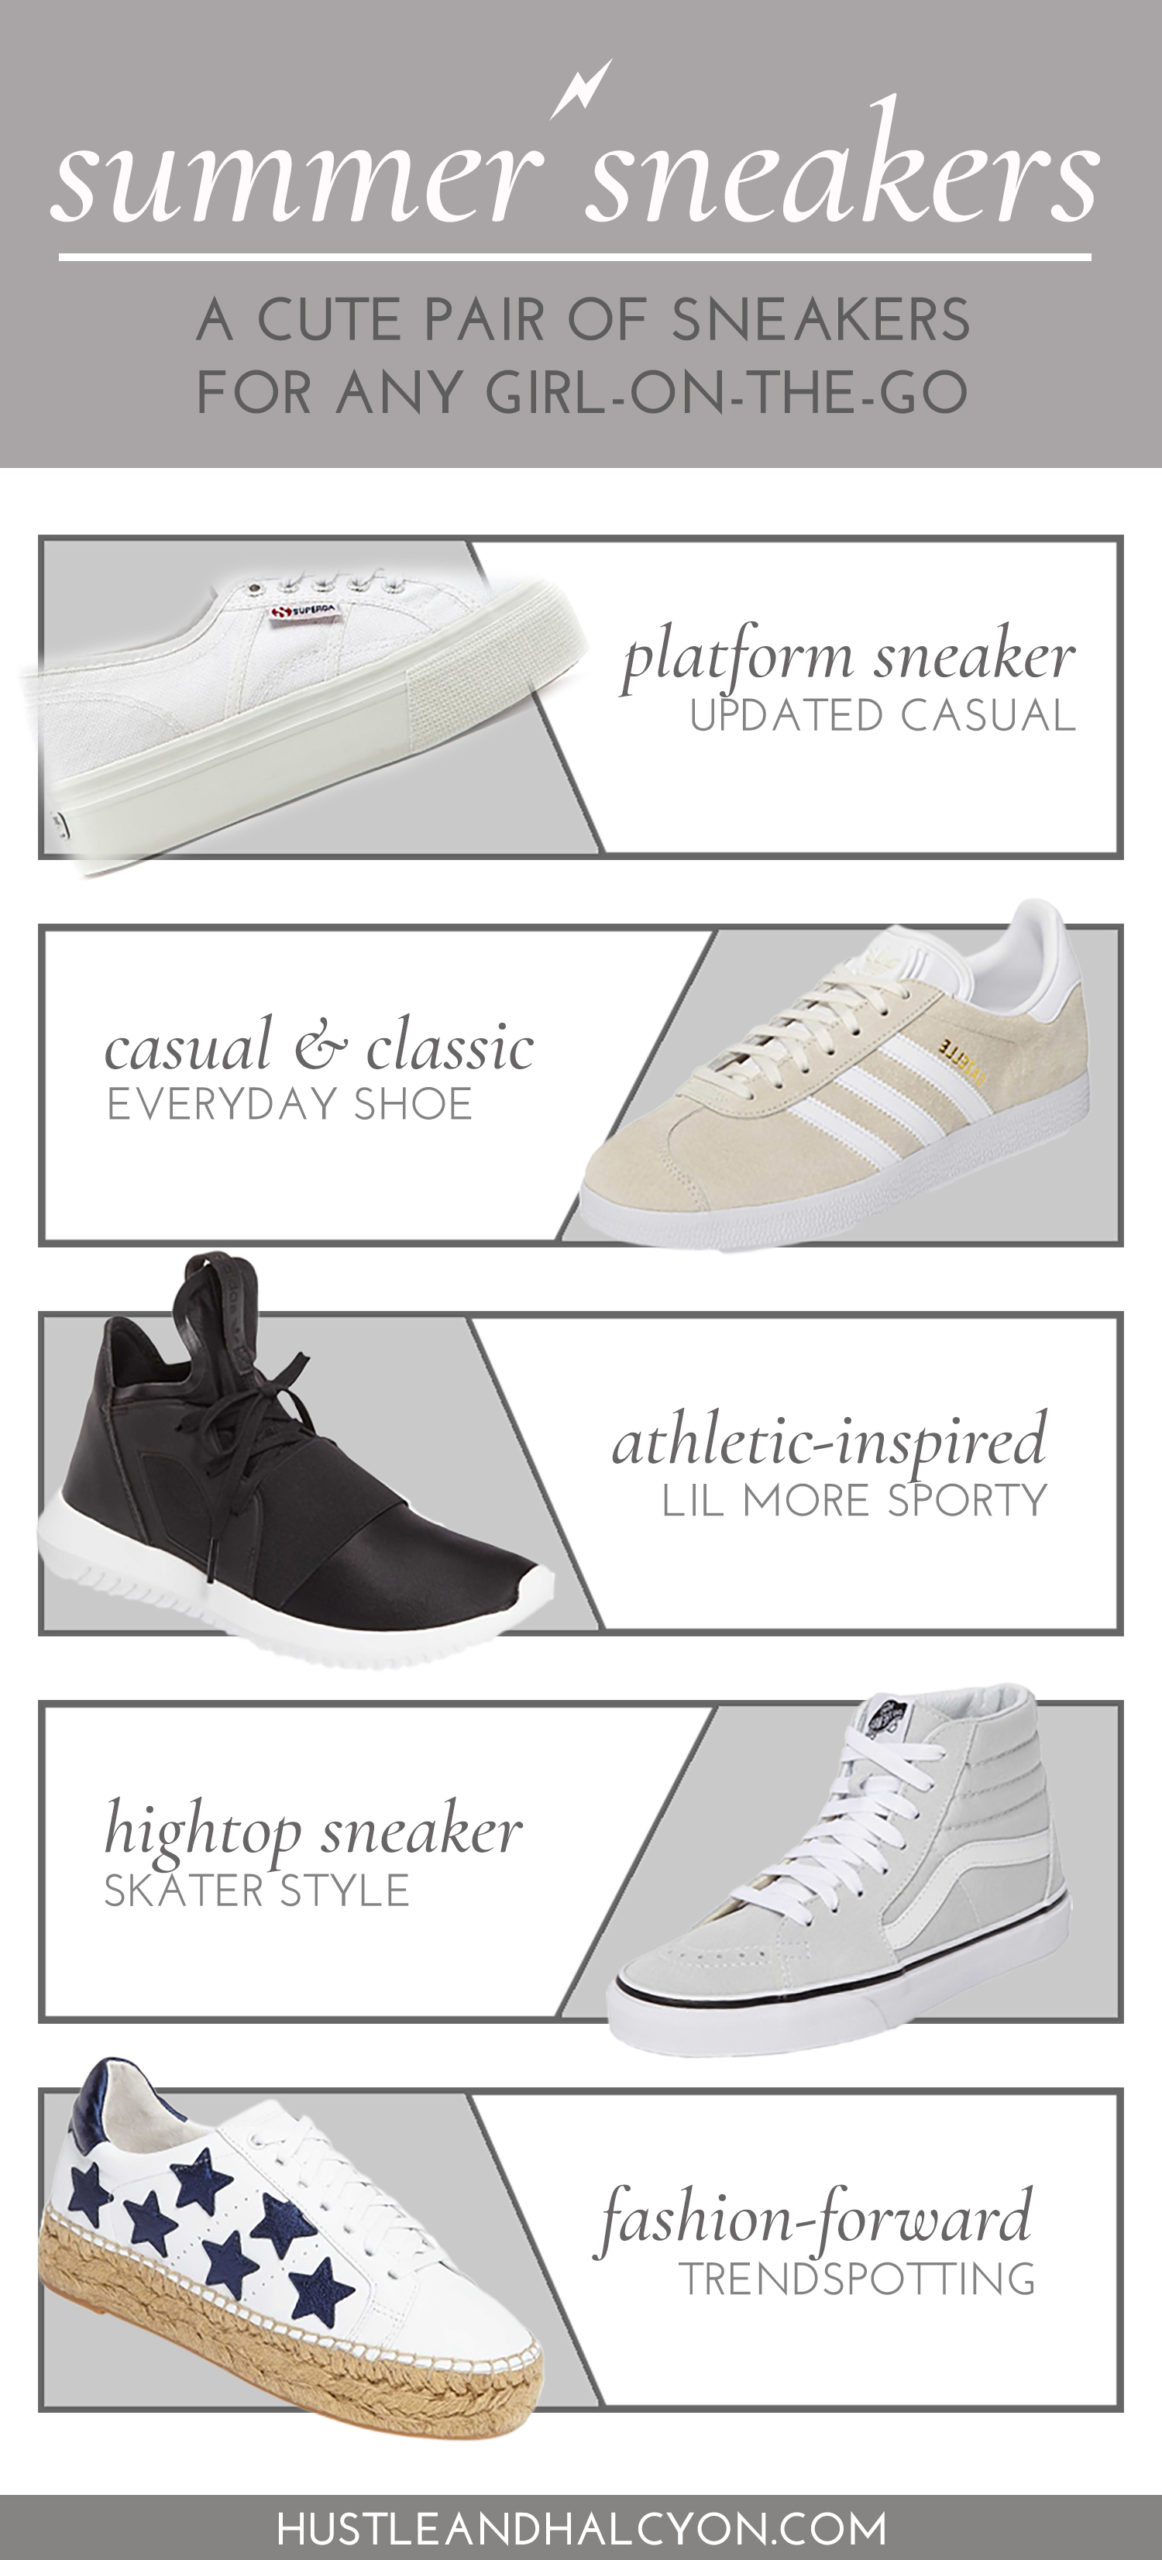 Summertime Sneakers: A Pair of Sneakers for Every Kind of Gal on the Go with Hustle + Halcyon